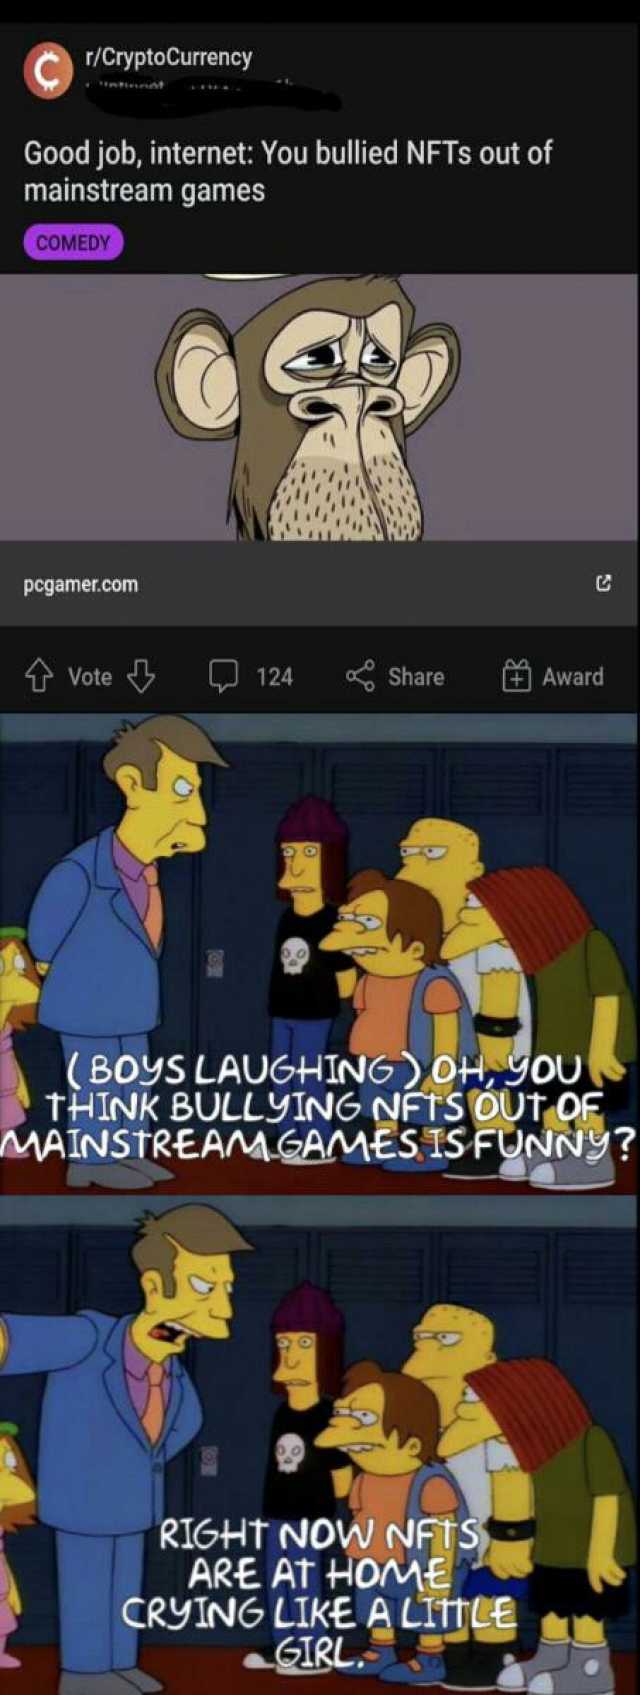 r/CryptoCurrency Good job internet You bullied NFTs out of mainstream games COMEDY pcgamer.com Vote Share Award 124 (BOYS LAUGHING ) OH JOU THINK BULLYTNG NEIs oUT OF MAINSTREAMGAMES ISFUNN9 RIGHT NOW NFTS ARE AT +HOME CRYING LIKE